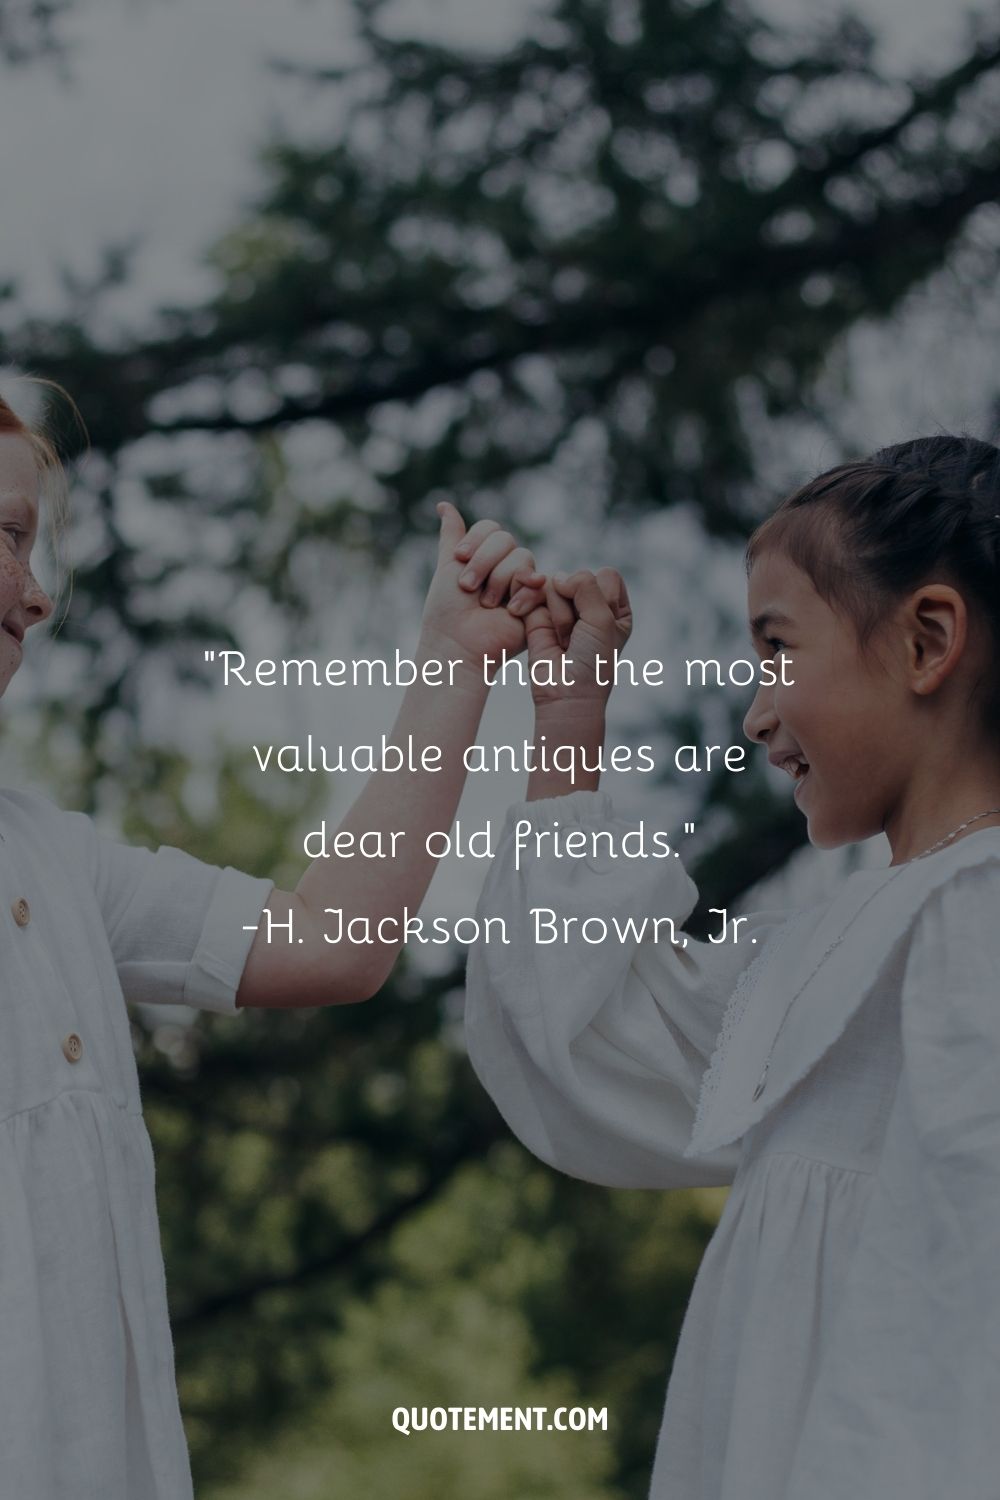 two girls in white shirts share engage in a heartwarming pinkie promise
